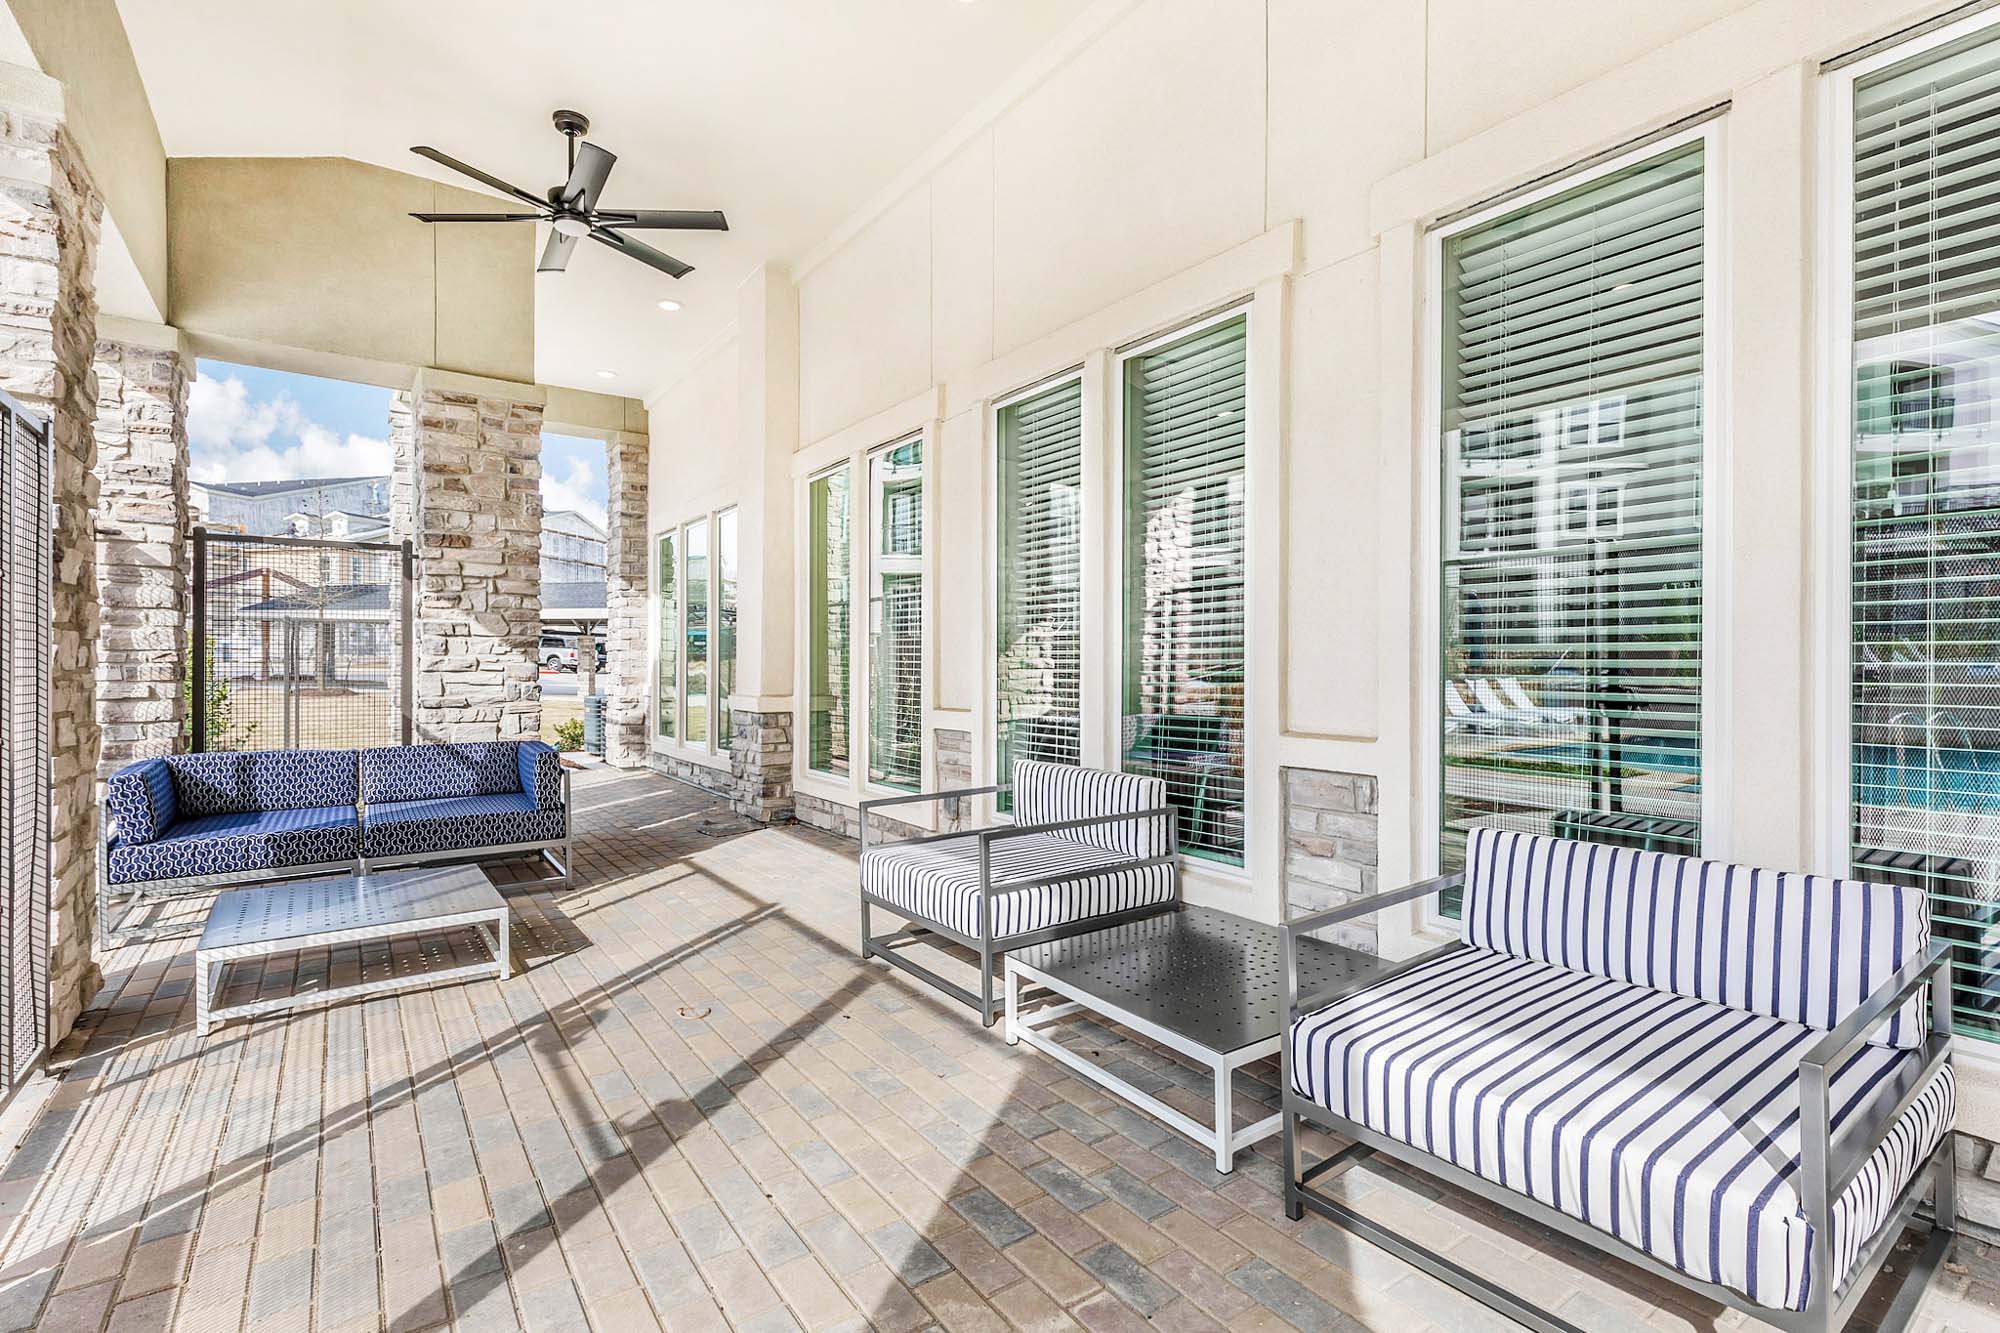 The outdoor patio at Embree Hill apartments in Dallas, TX.